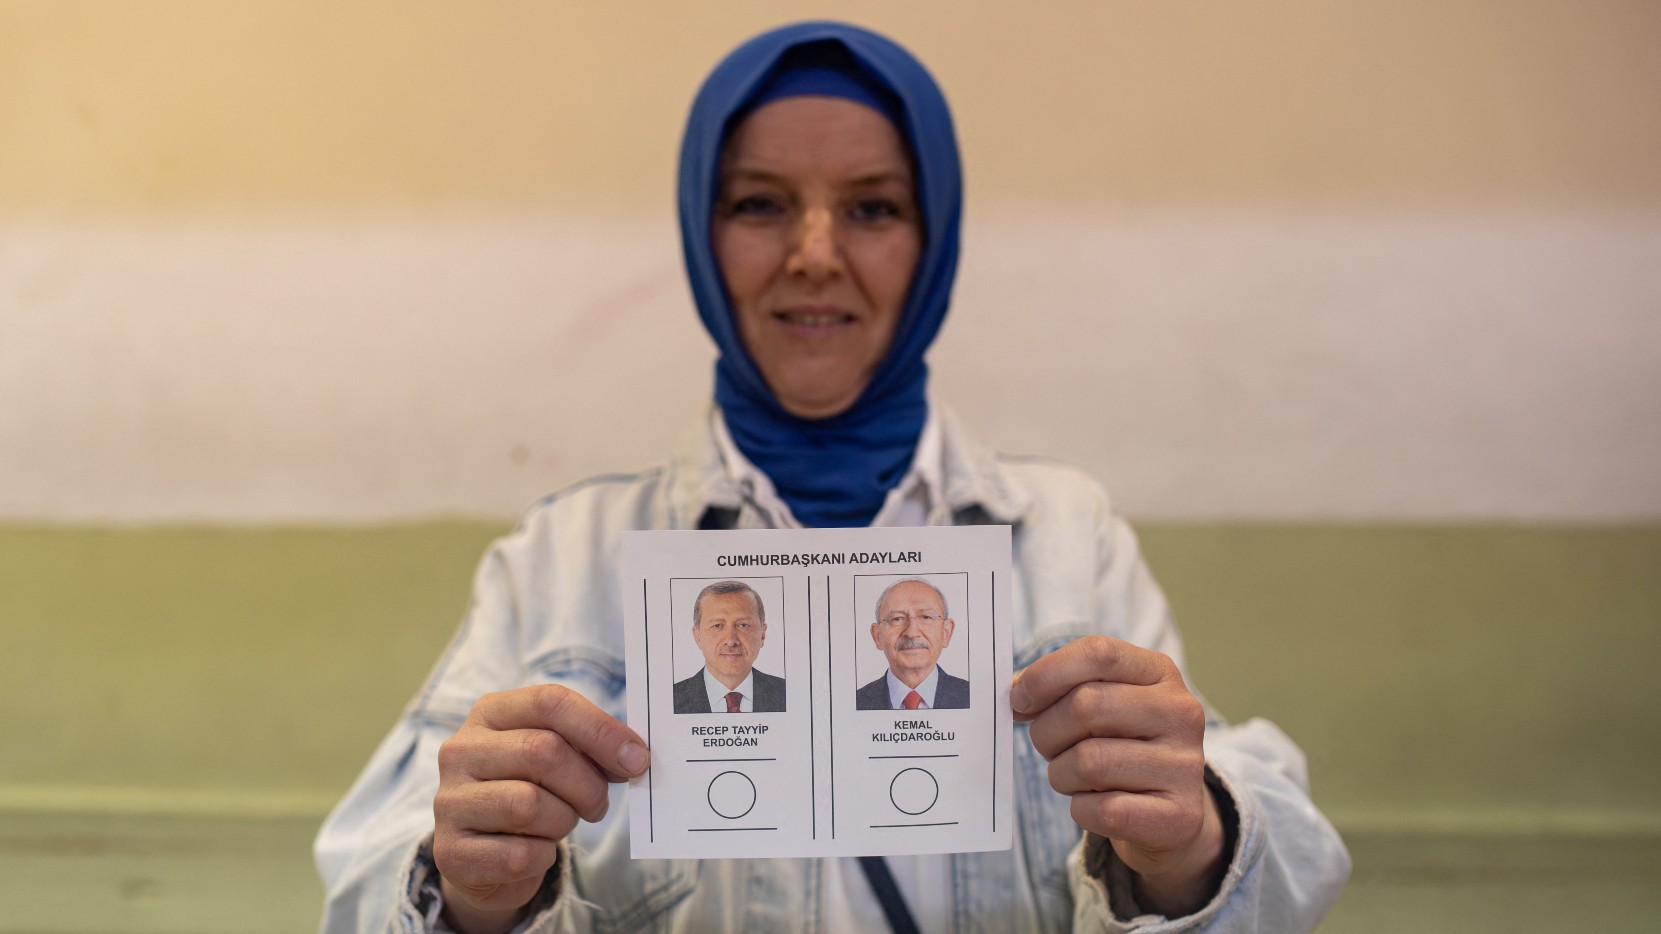 A woman holds ballot papers showing Turkish presidential candidates Recep Tayyip Erdogan (R) and Kemal Kilicdaroglu at a polling station in Kocaeli on 28 May (AFP)